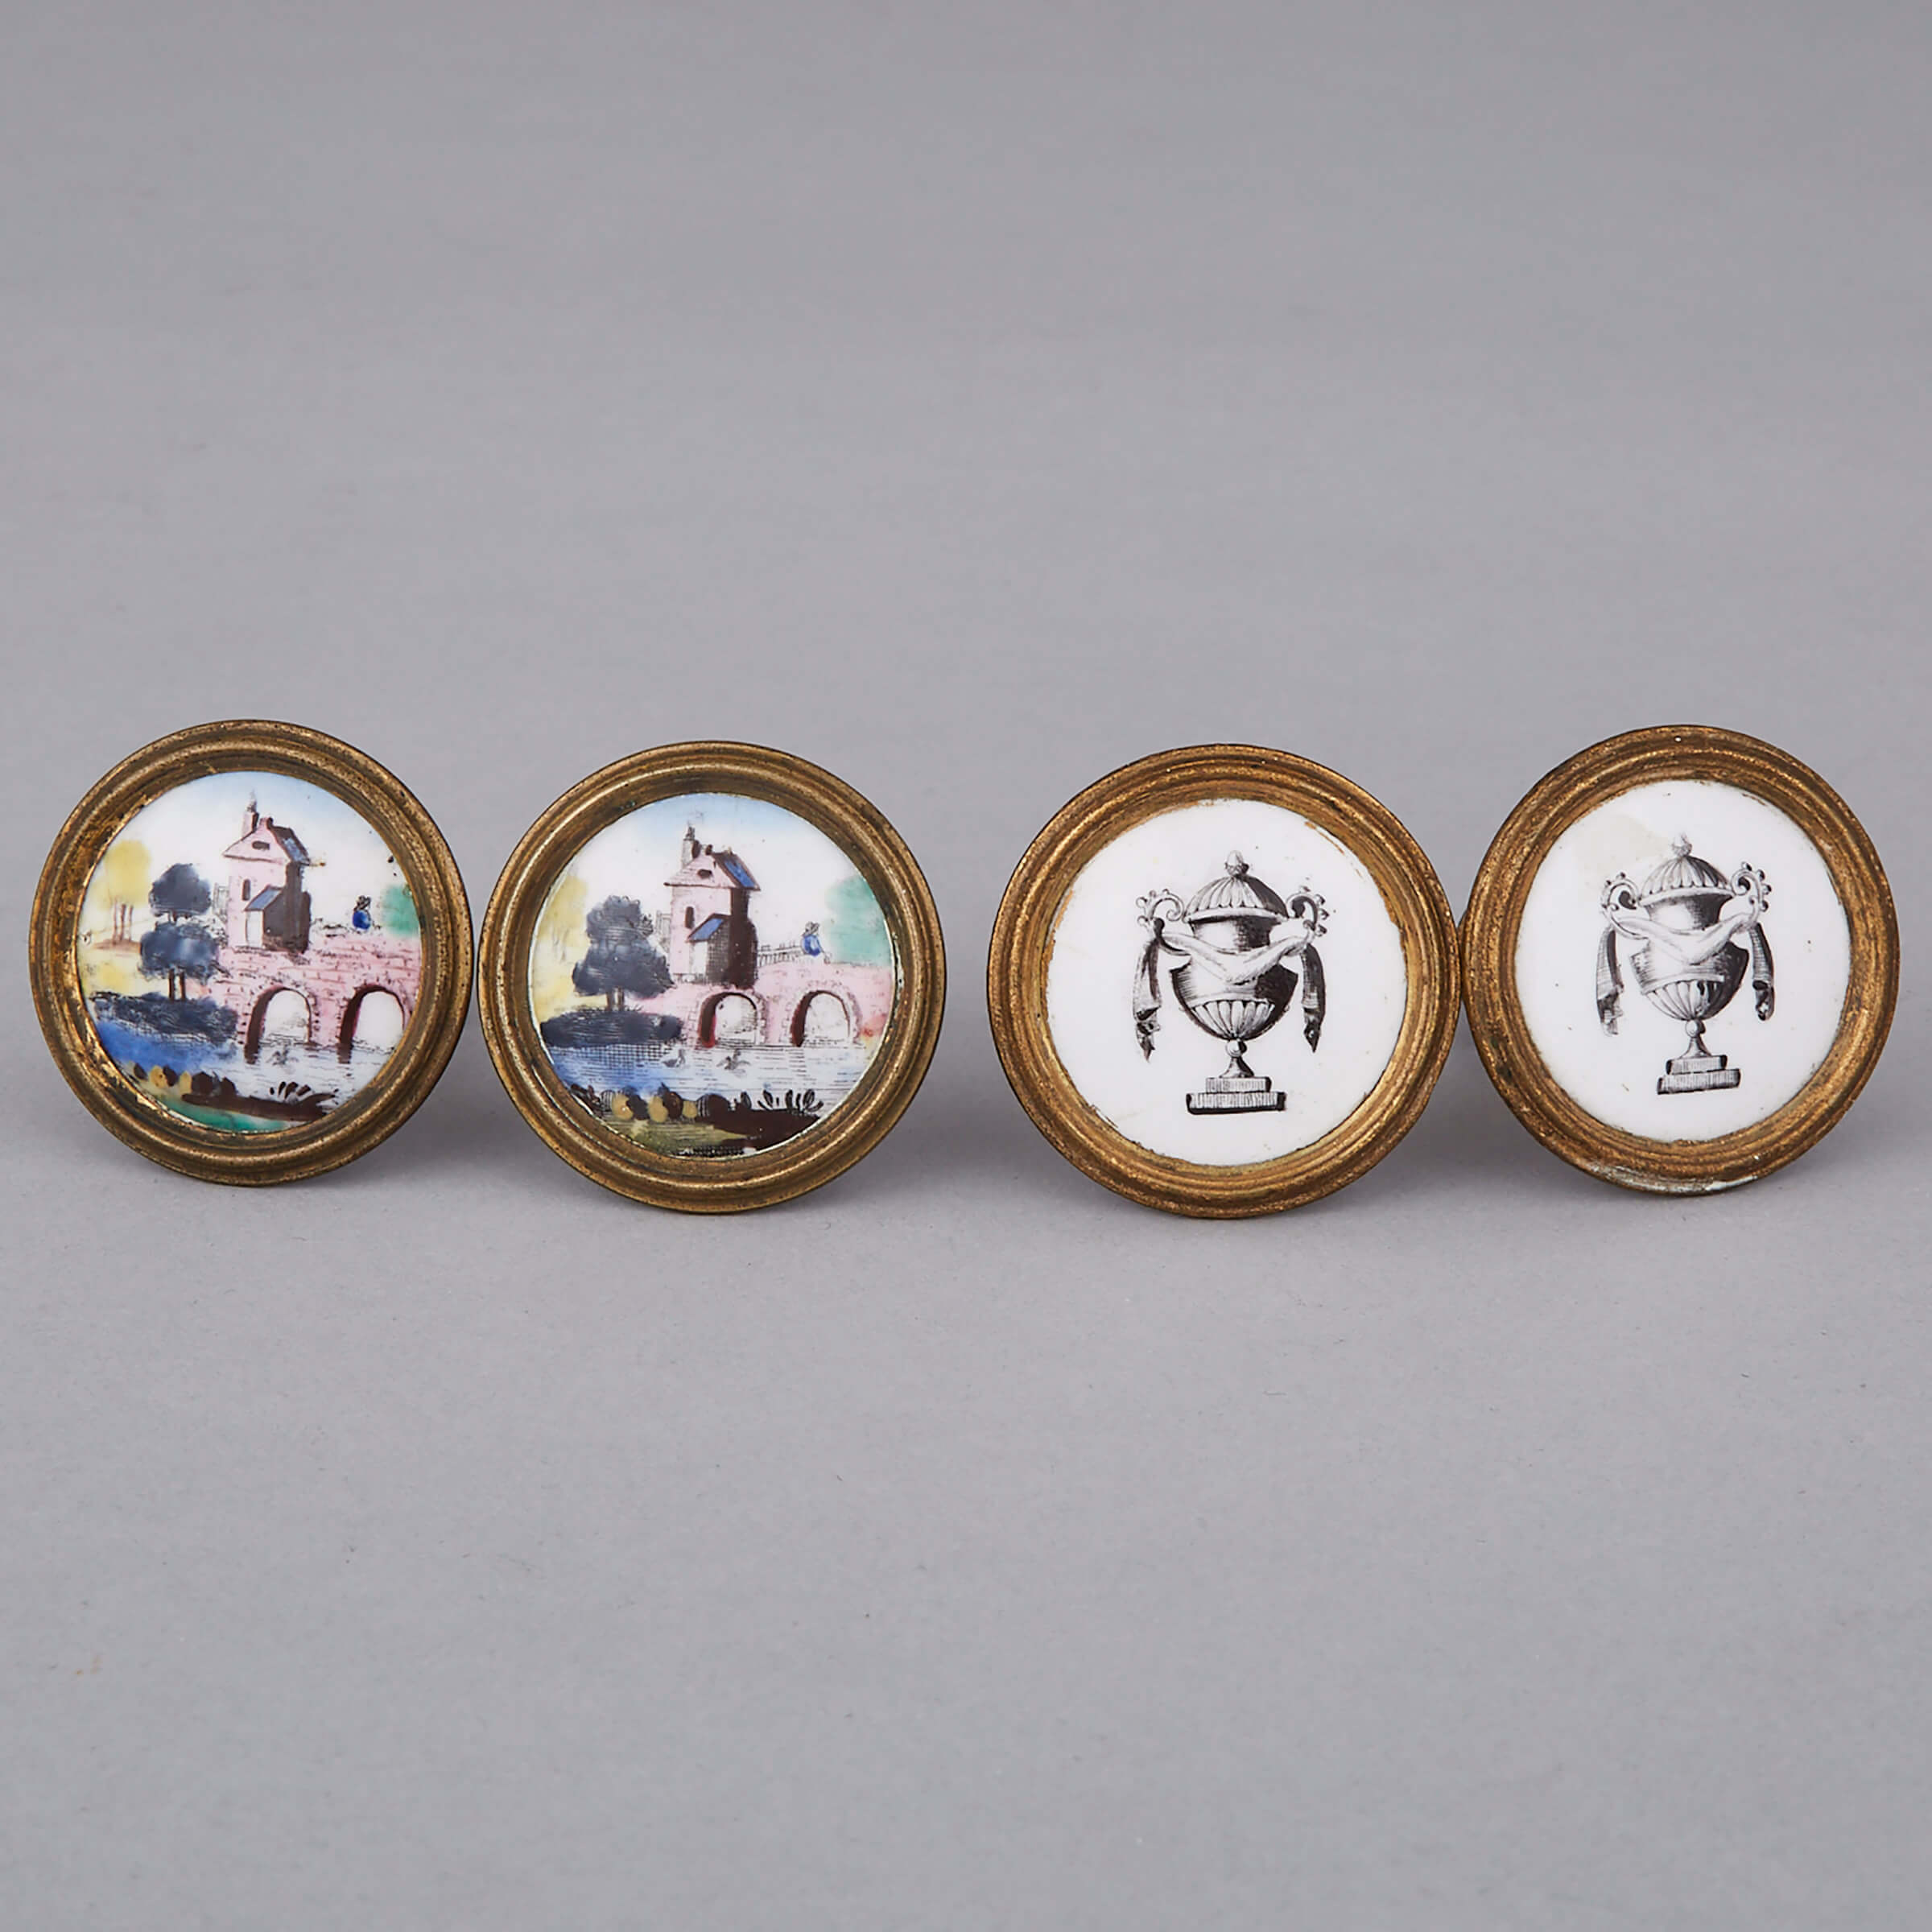 Two Small Pairs of Battersea Enamel Curtain Tiebacks or Picture Hangers, 18th/19th century 